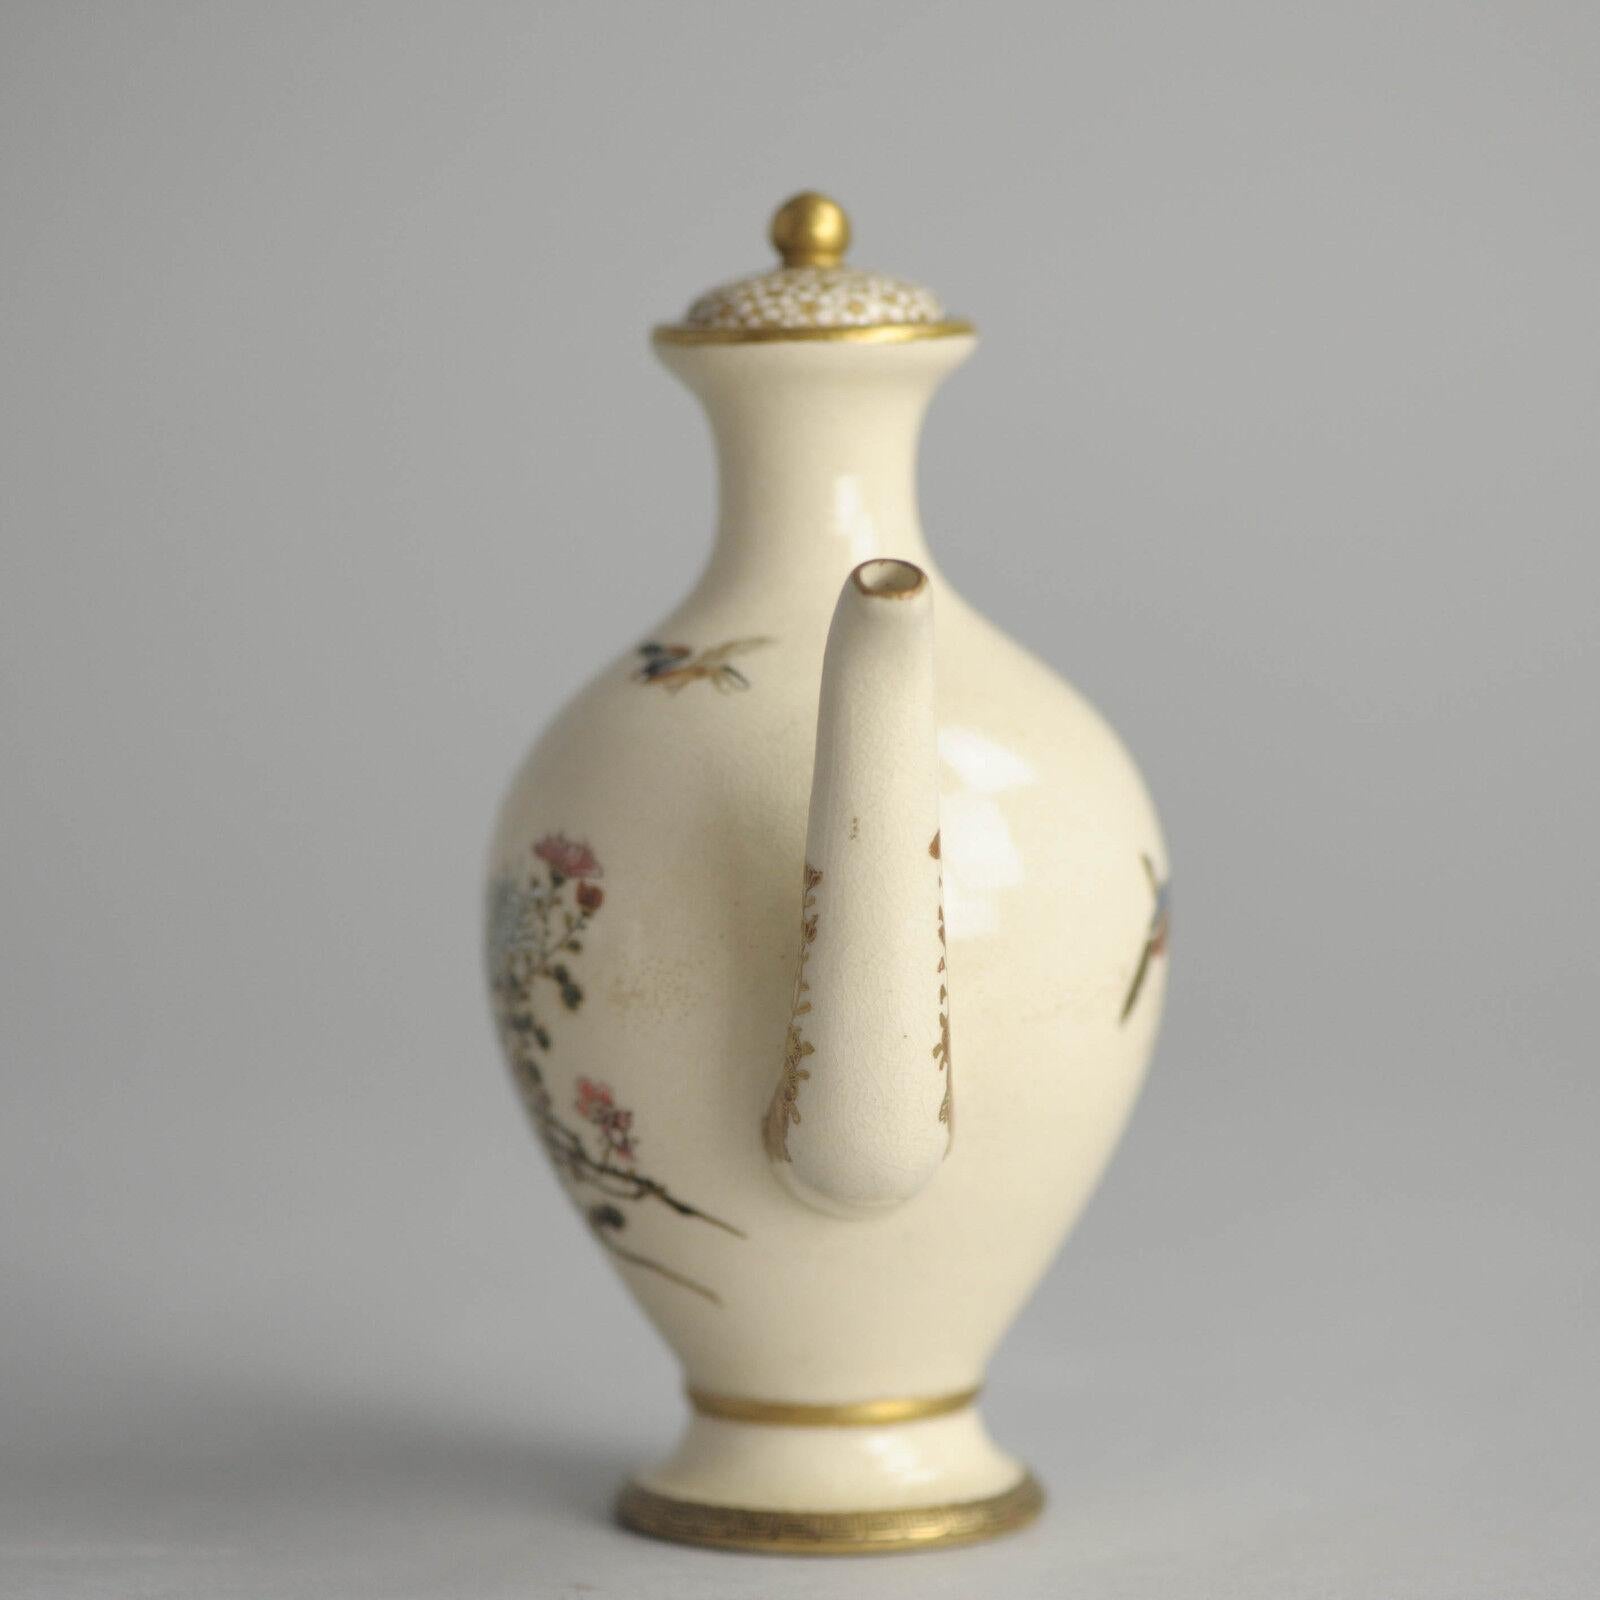 Epical Piece.The painting work is cool.

Additional information:
Material: Porcelain & Pottery
Region of Origin: China
Period: Meiji Period
Original/Reproduction: Original
Age: 1800-1849
Condition: No Chip, No Hairline, No restoration, No damage.